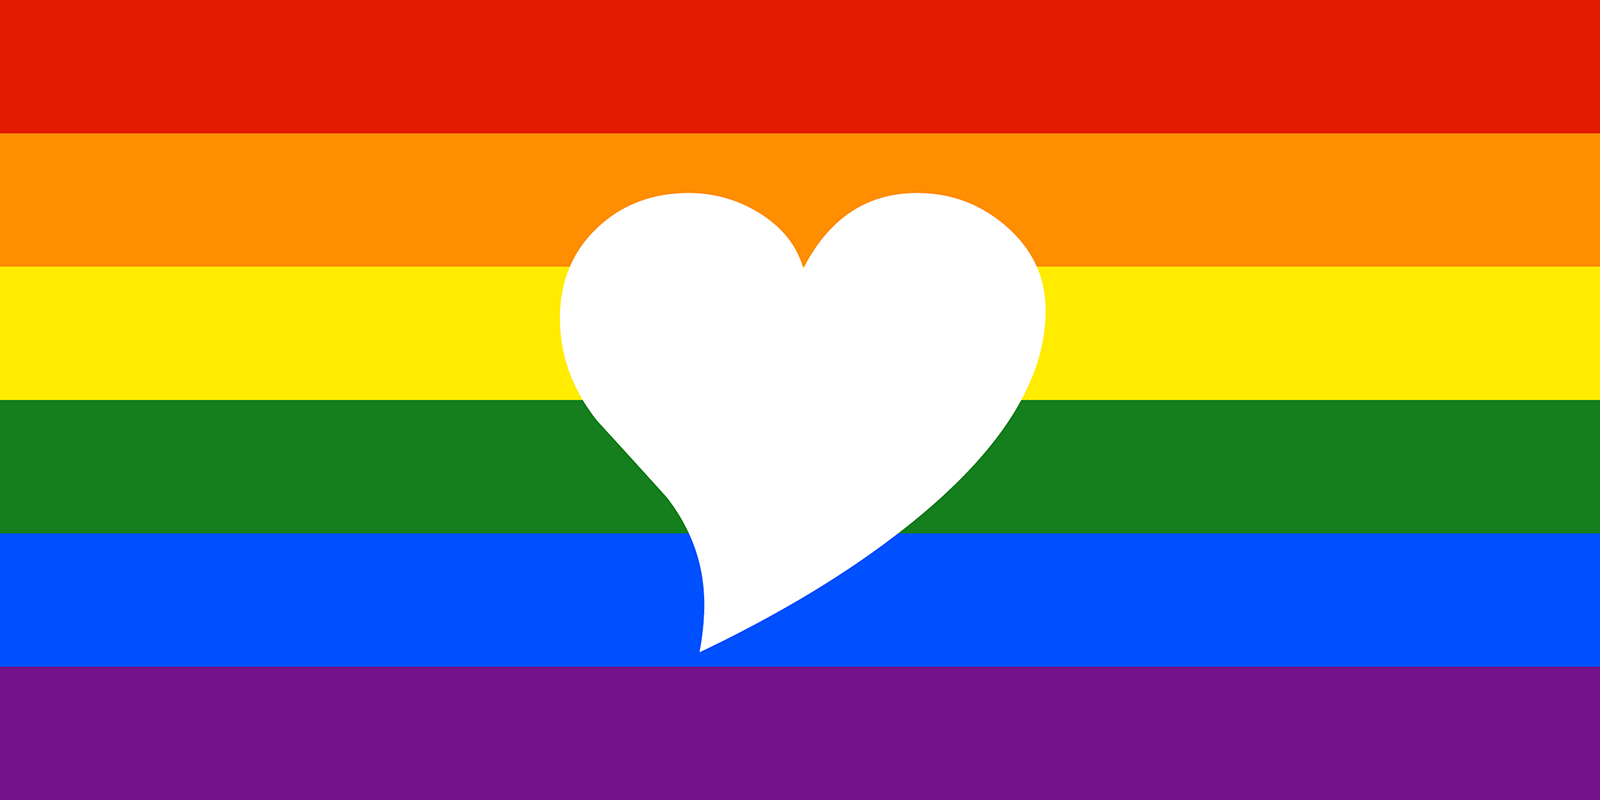 Pride LGBT month Image picture and profile photo frames Picture Frames for Facebook